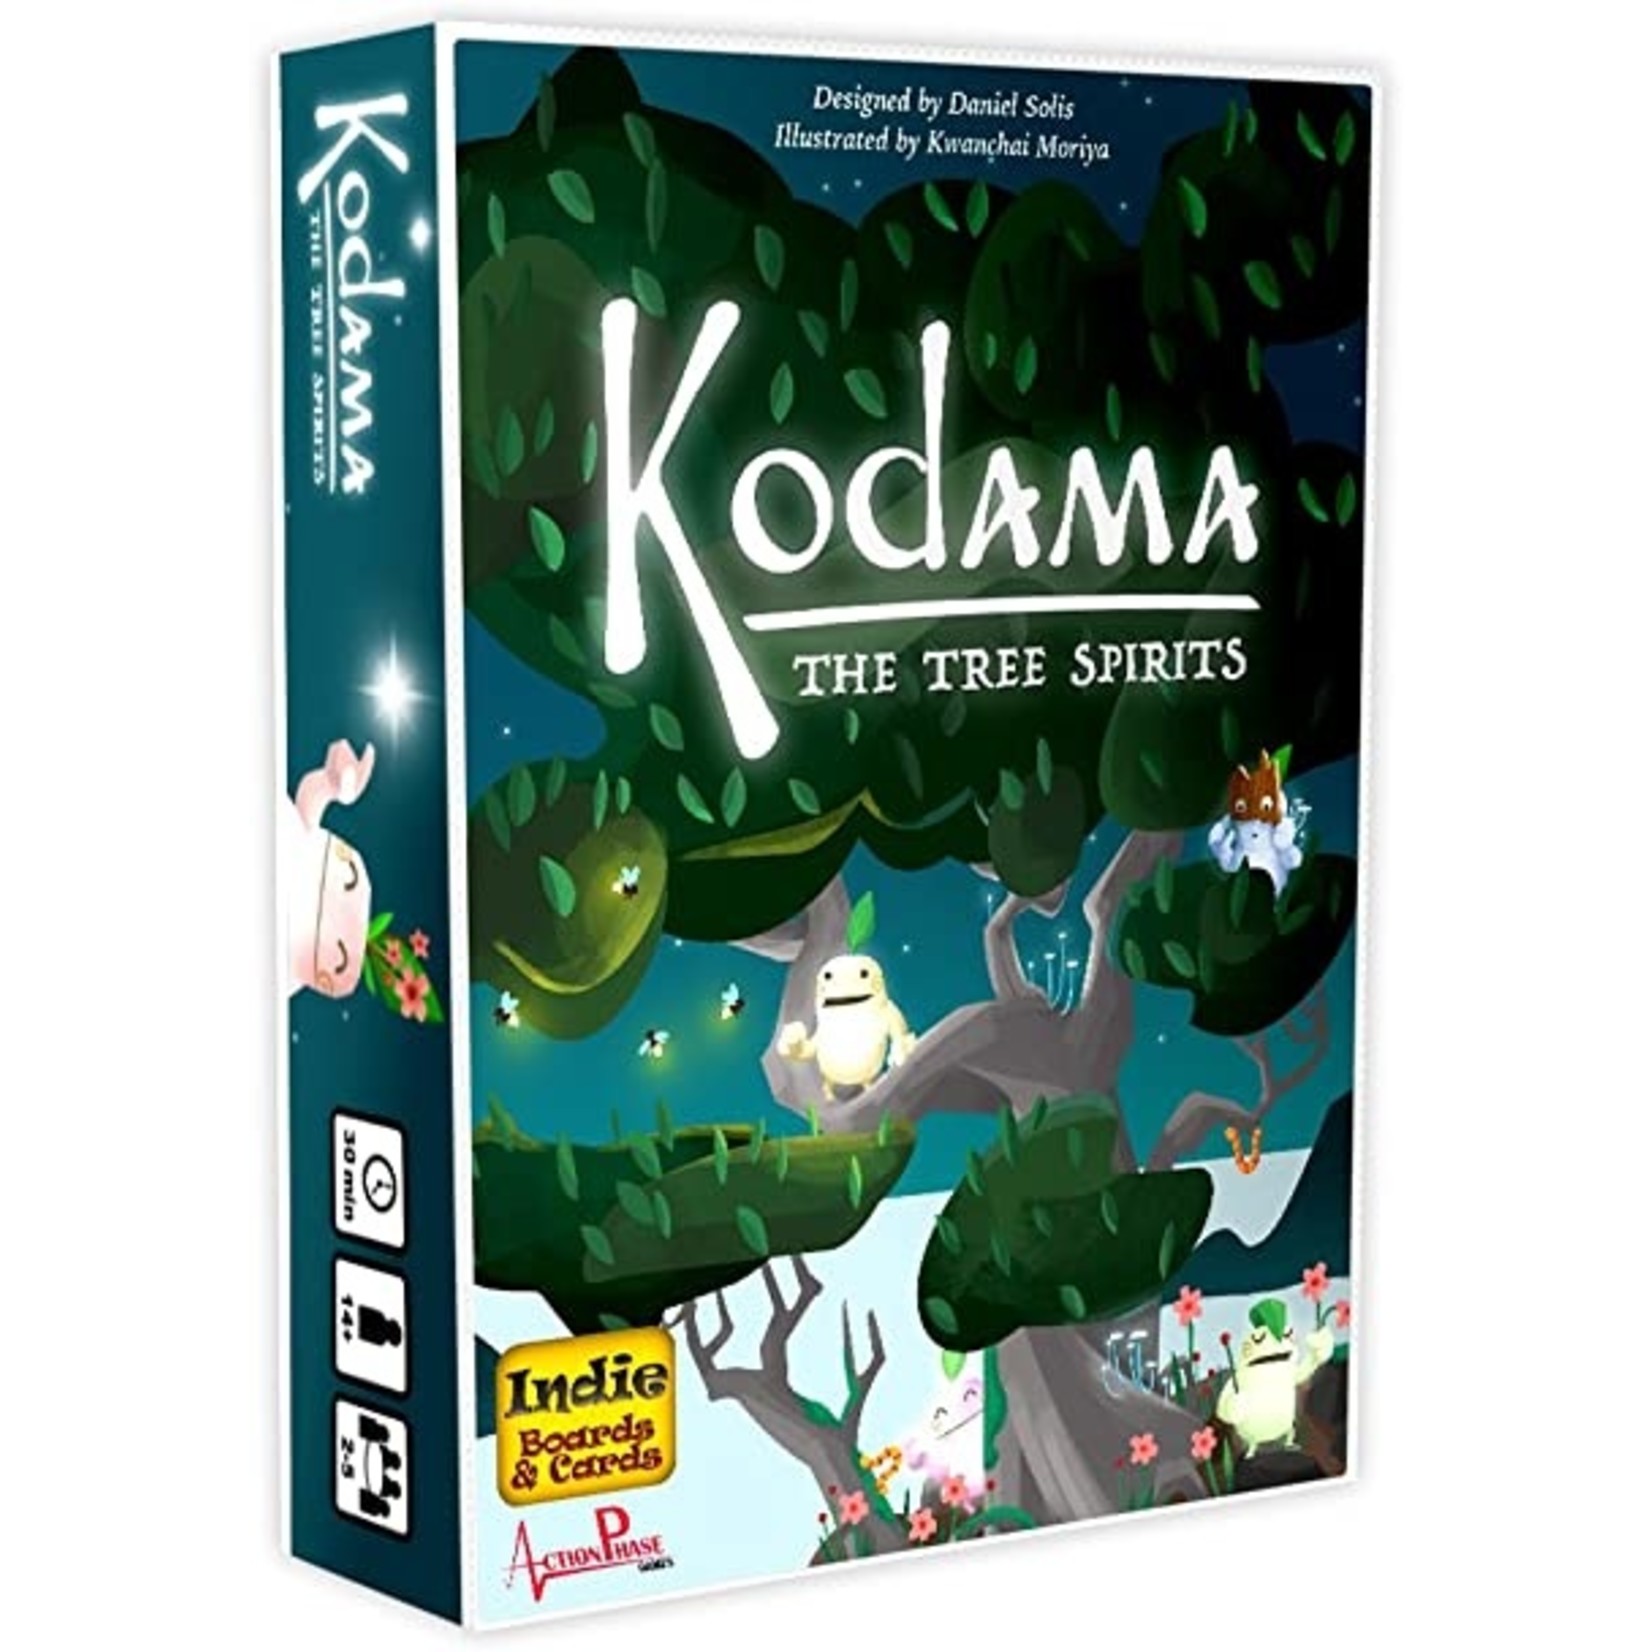 Indie Boards & Cards Kodama: The Tree Spirits Second Edition